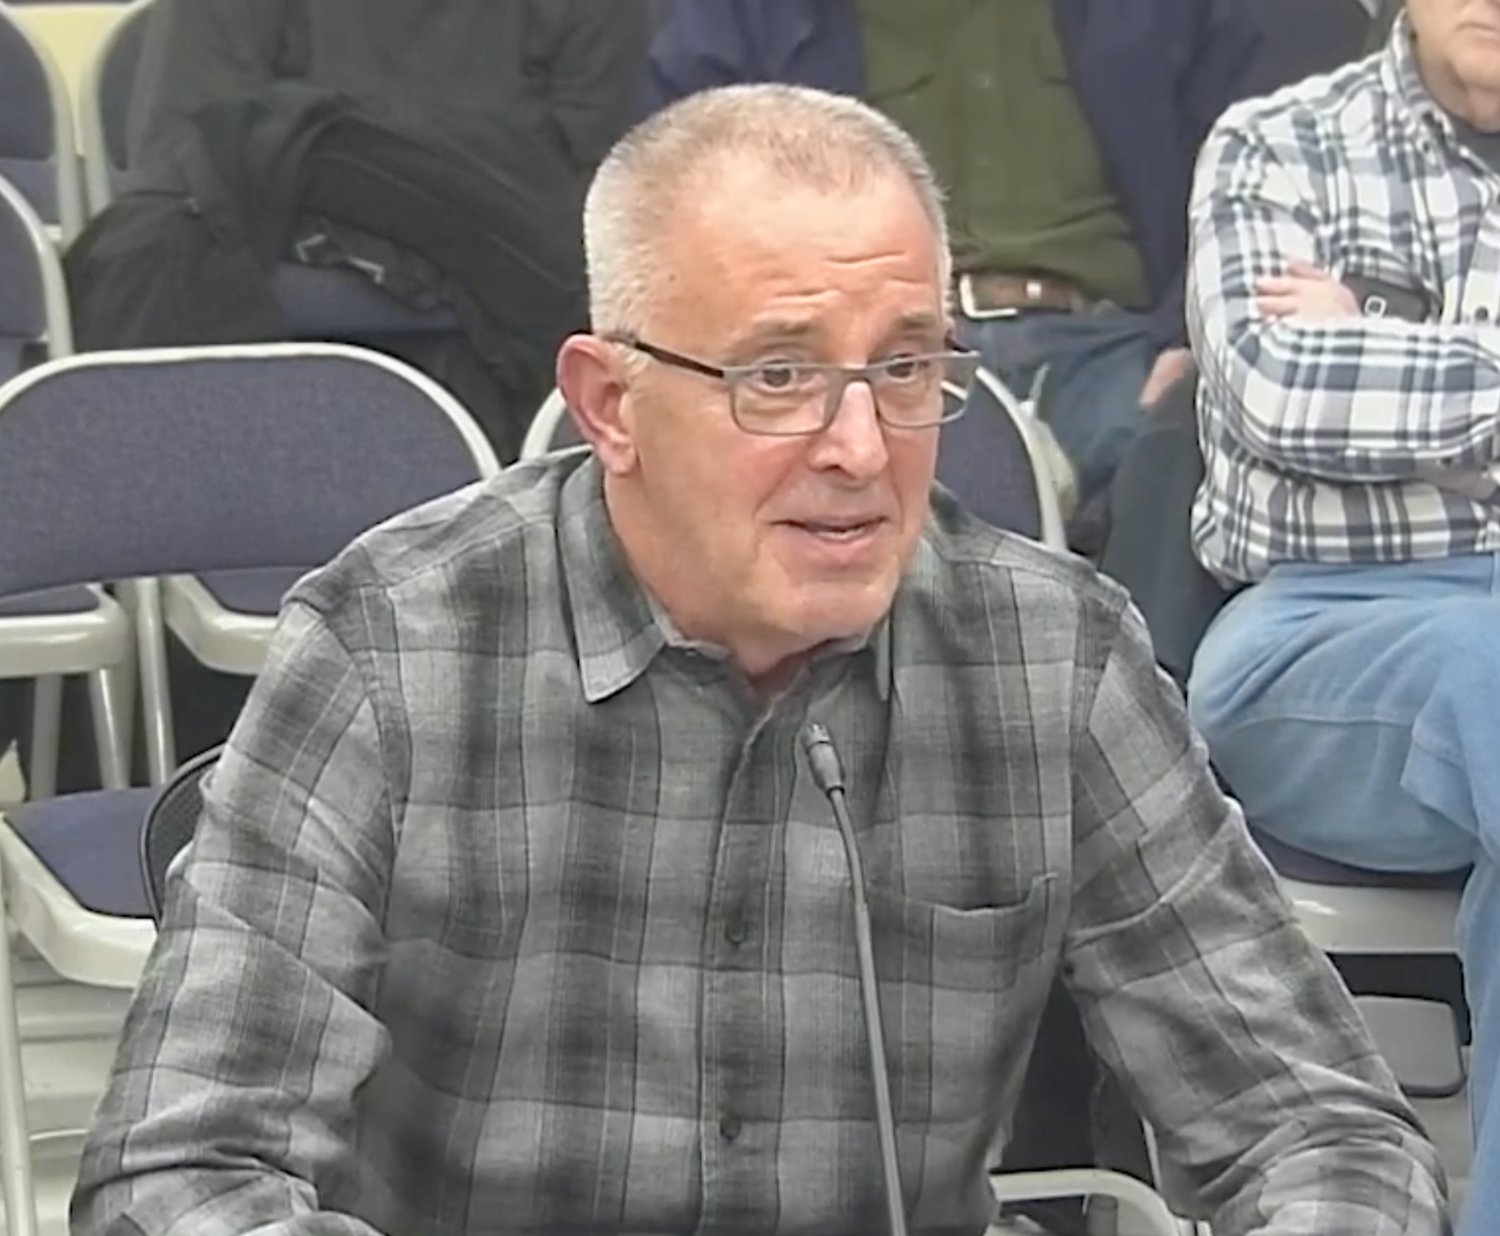 Roger Menard explained his resignation at a meeting of the Westport Select Board earlier this month.